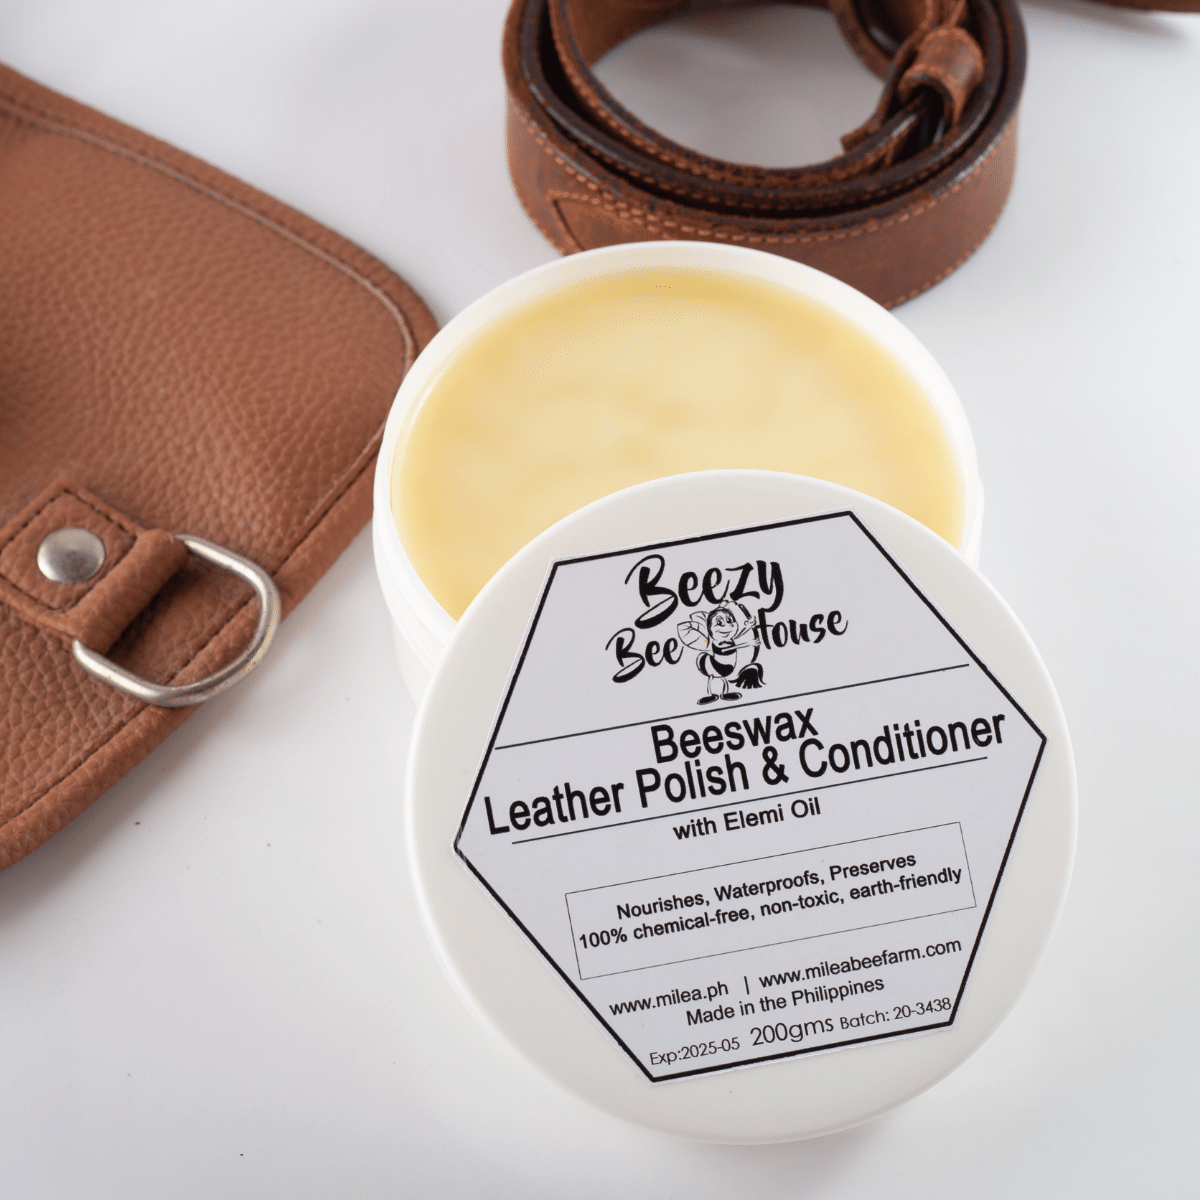 Beeswax Leather Polish and Conditioner